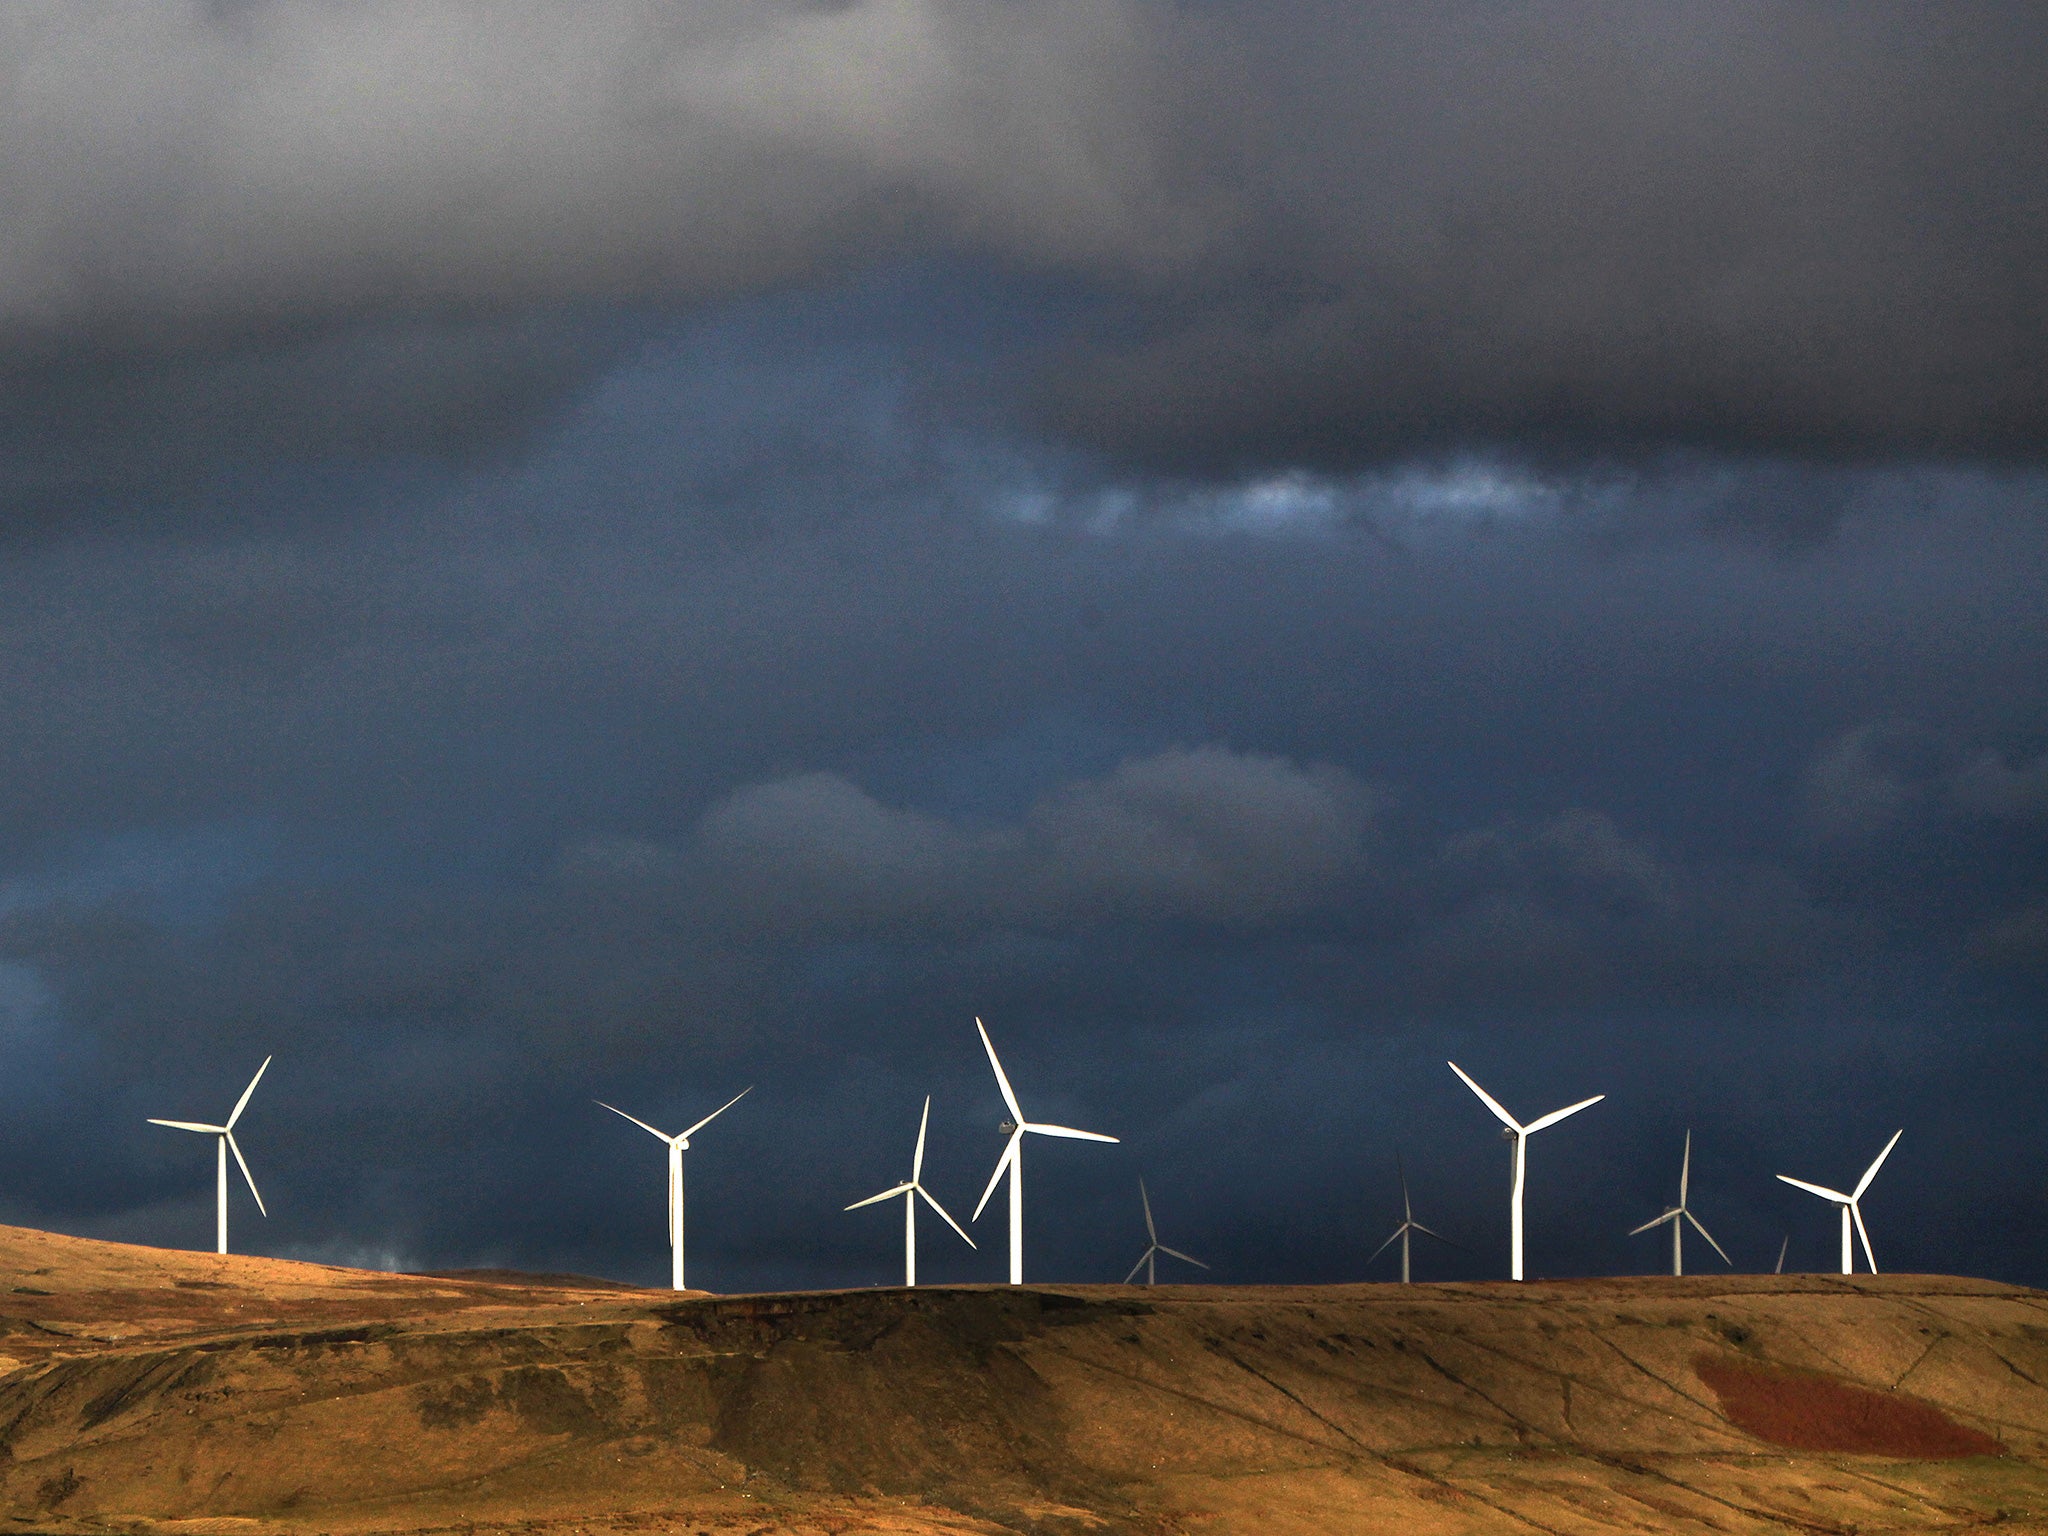 The Scout Moor Wind Farm in Rochdale, the South Pennines. The Government insists renewable energy must be ‘cost-effective’, and advocates fear that support will be cut